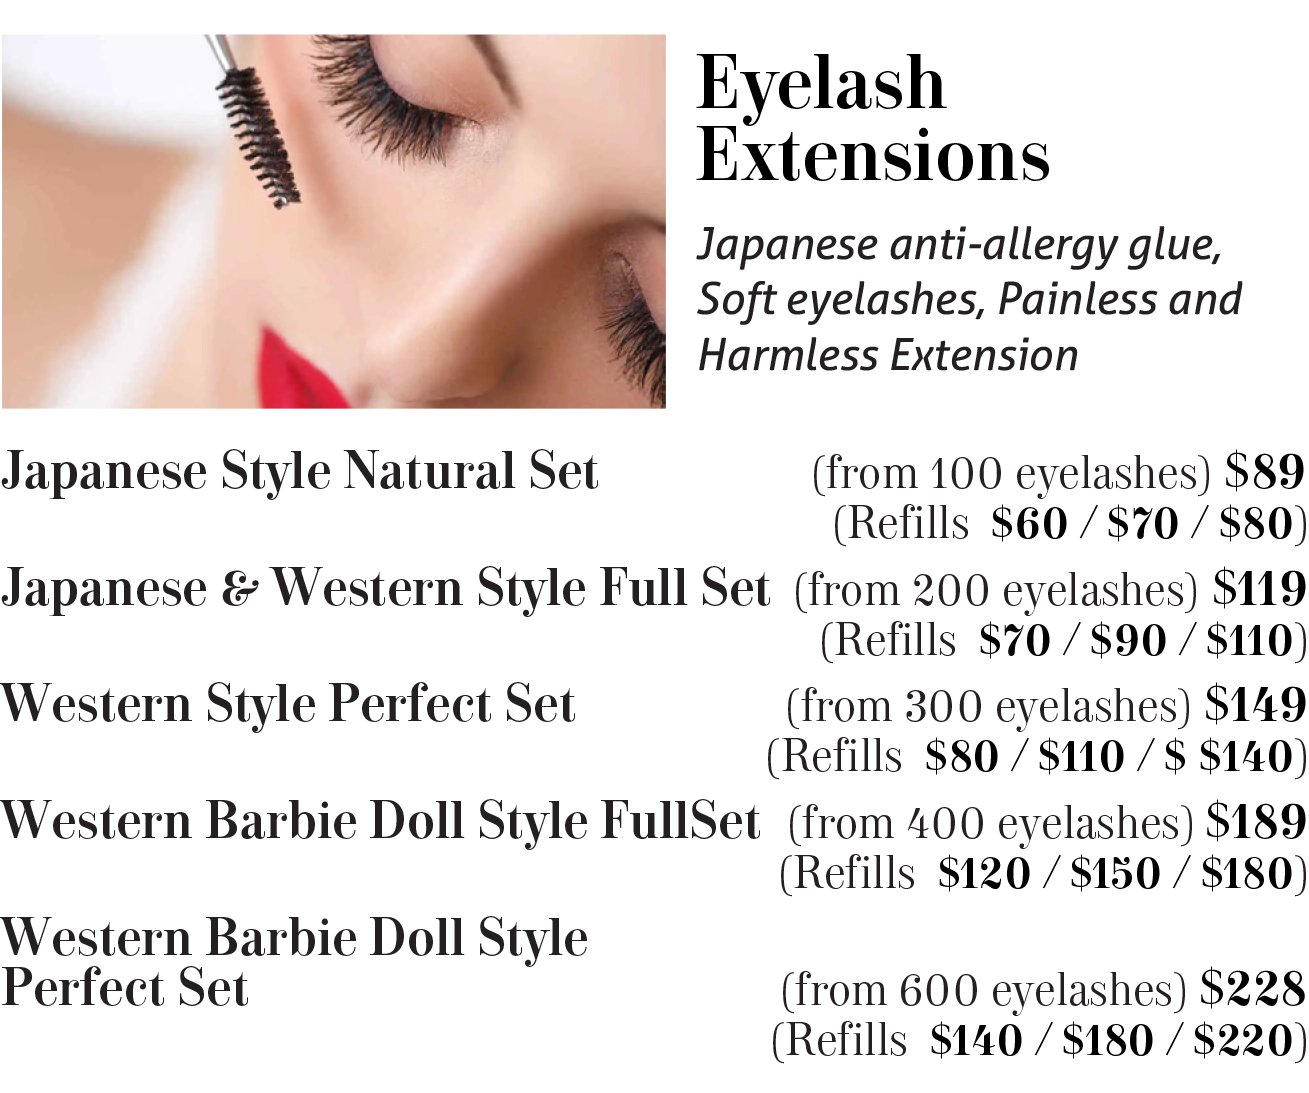 Erin Cosmetic Beauty SPA services